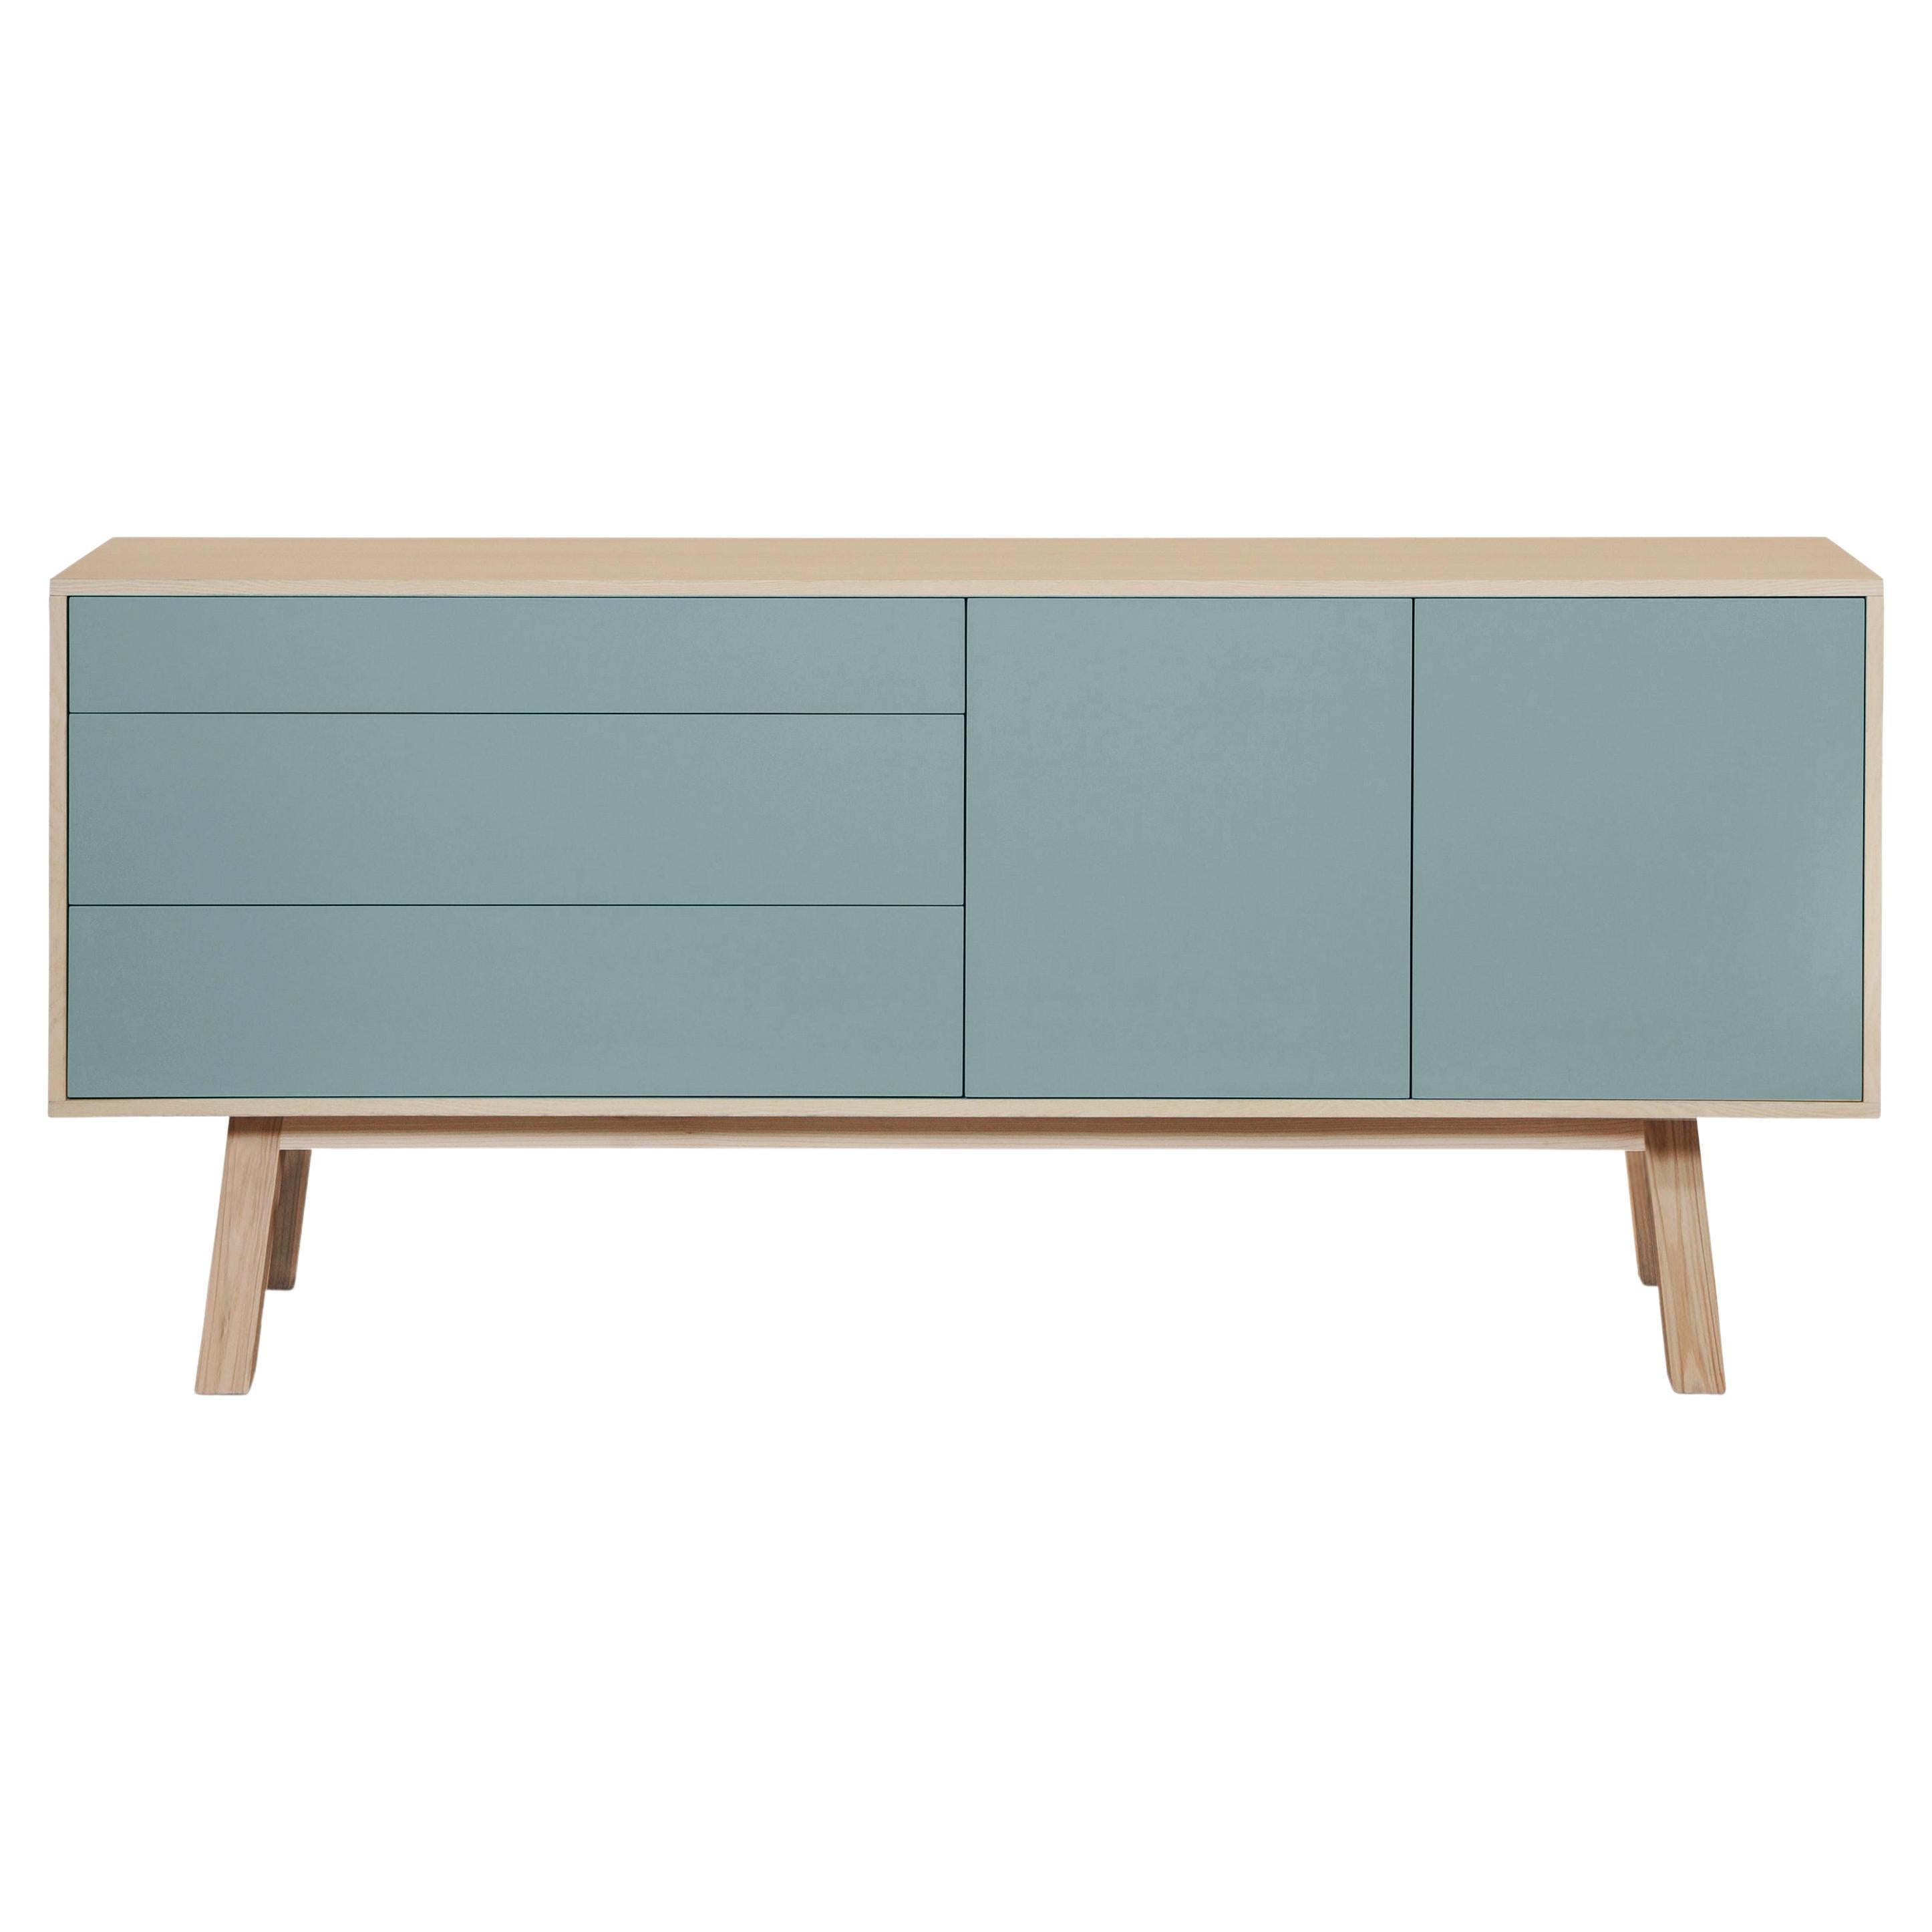 2-Door 3 Drawer High Sideboard in Ash, Design Eric Gizard, Paris Made in France For Sale